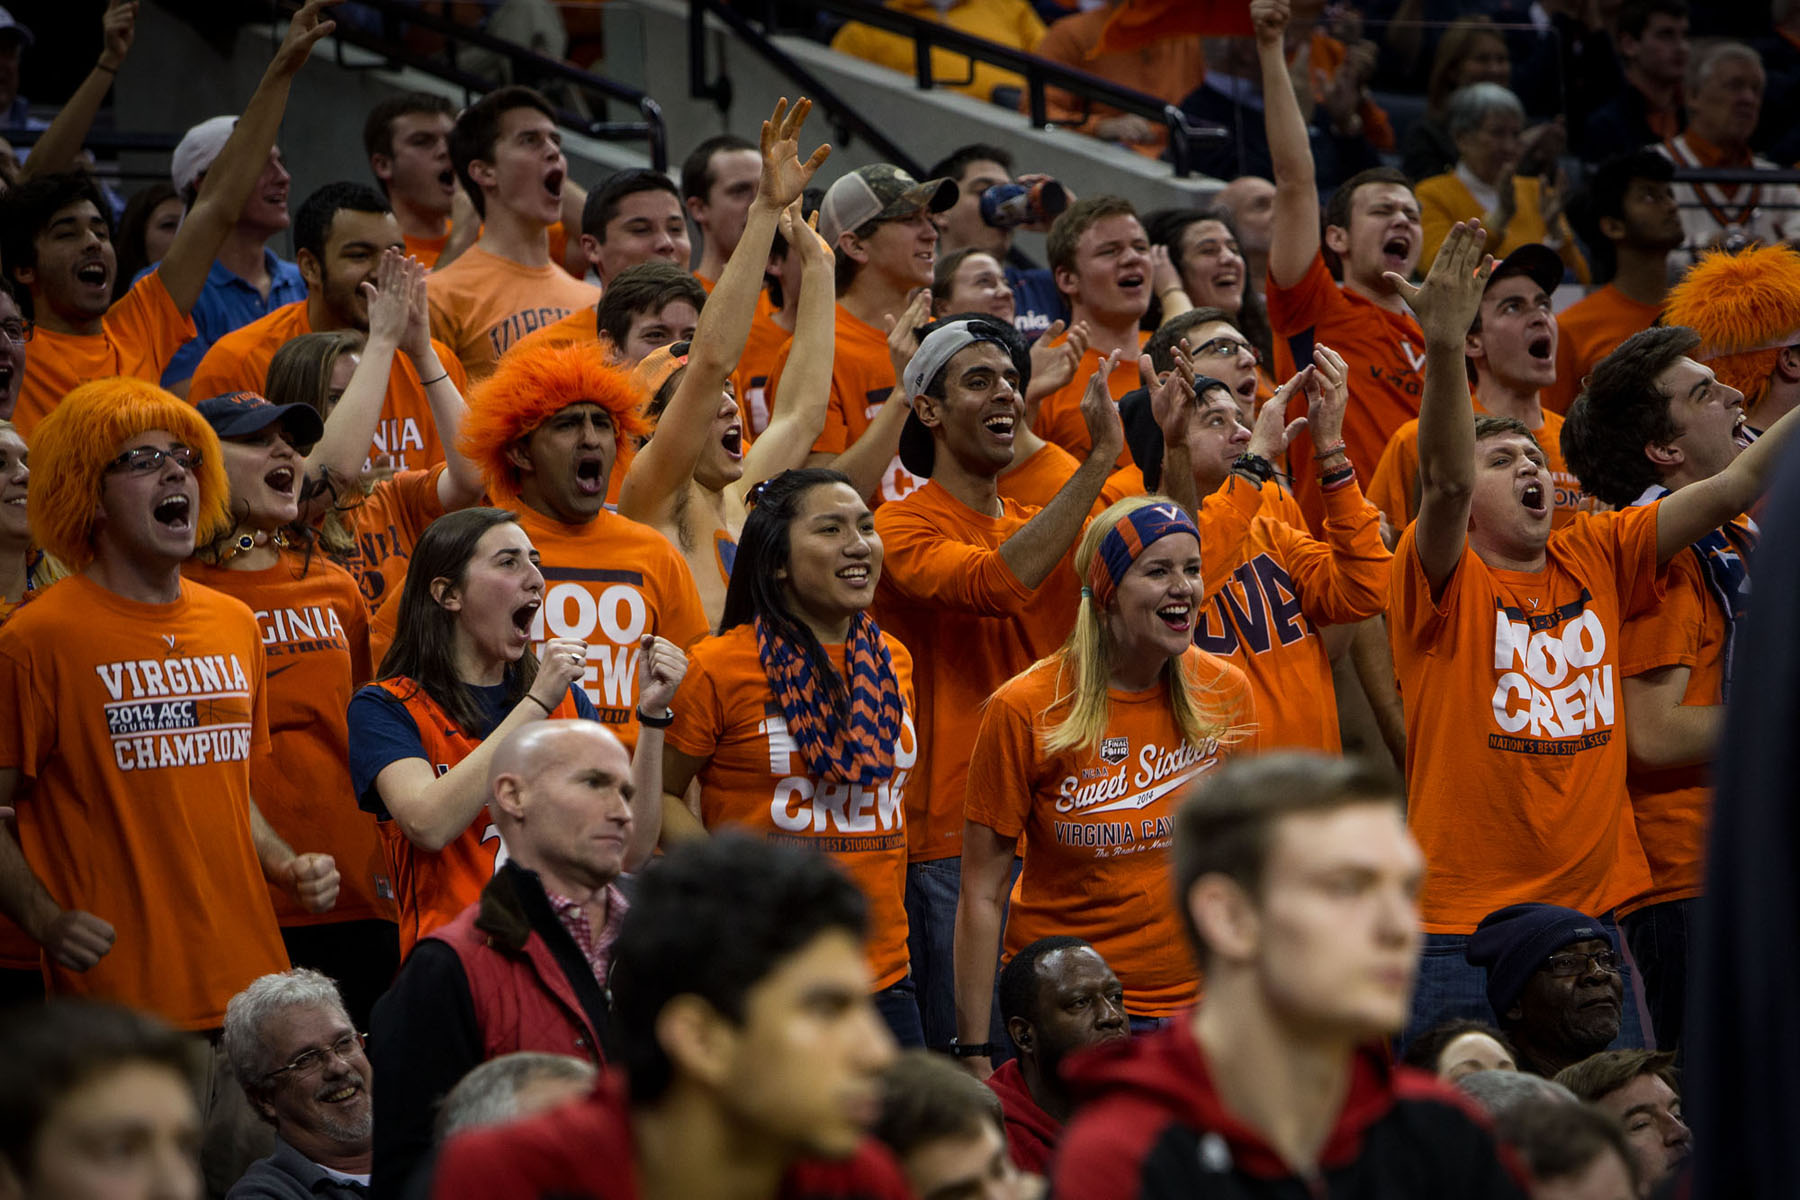 Crowd of UVA students all wearing orange screaming during a basketball game